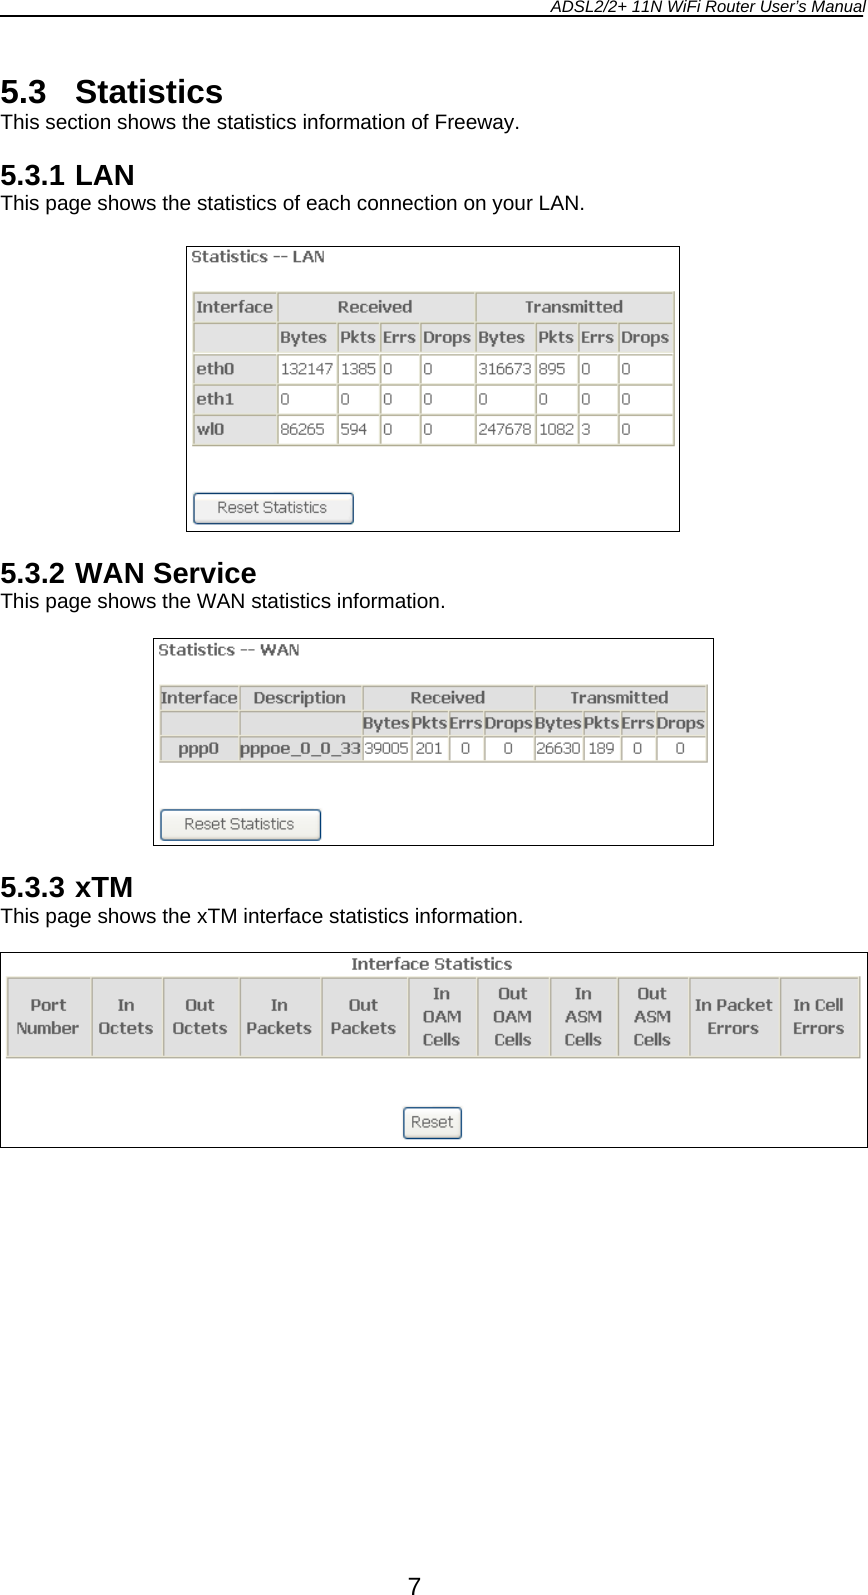 ADSL2/2+ 11N WiFi Router User’s Manual  7 5.3 Statistics This section shows the statistics information of Freeway.  5.3.1 LAN This page shows the statistics of each connection on your LAN.    5.3.2 WAN Service This page shows the WAN statistics information.    5.3.3 xTM This page shows the xTM interface statistics information.    